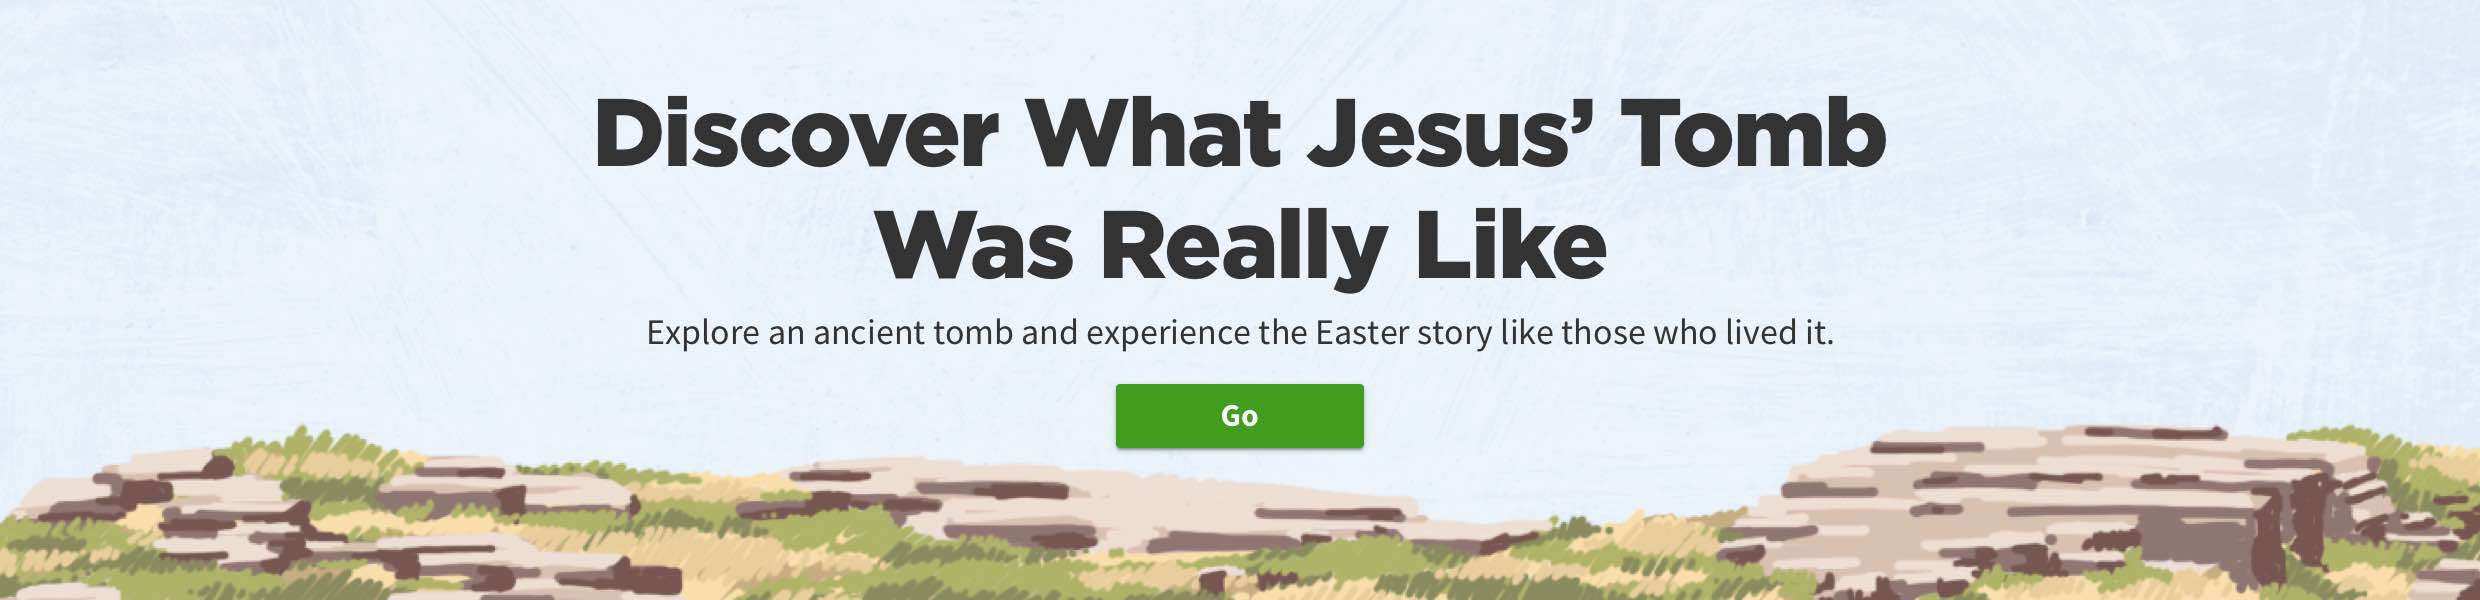 clickable image: Discover What Jesus' Tomb Was Really Like. Go.